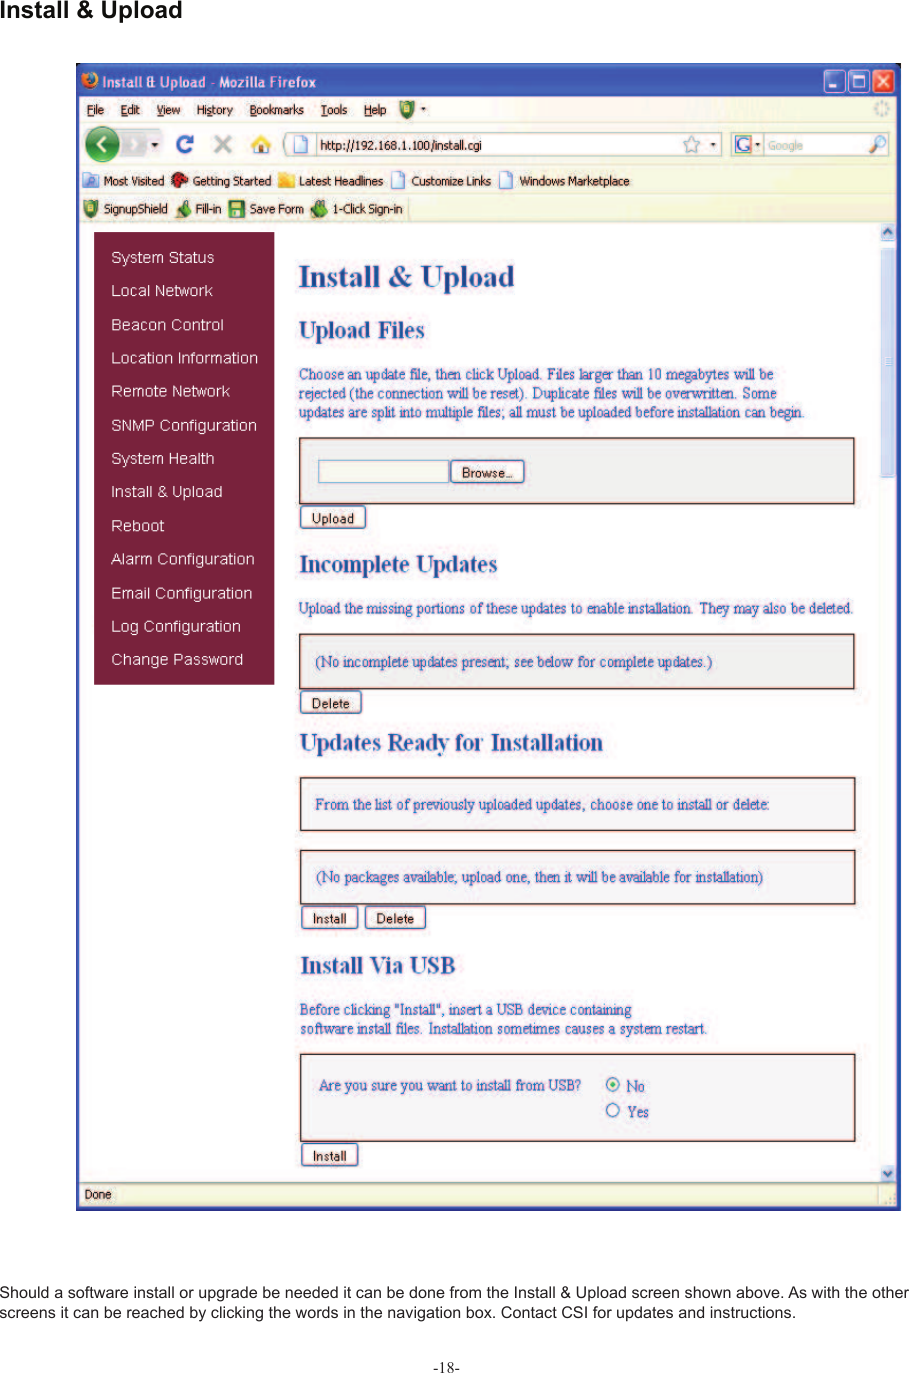 -18-Should a software install or upgrade be needed it can be done from the  Install &amp; Upload screen shown above. As with the other screens it can be reached by clicking the words in the navigation box. Contact CSI for updates and instructions. Install &amp; Upload